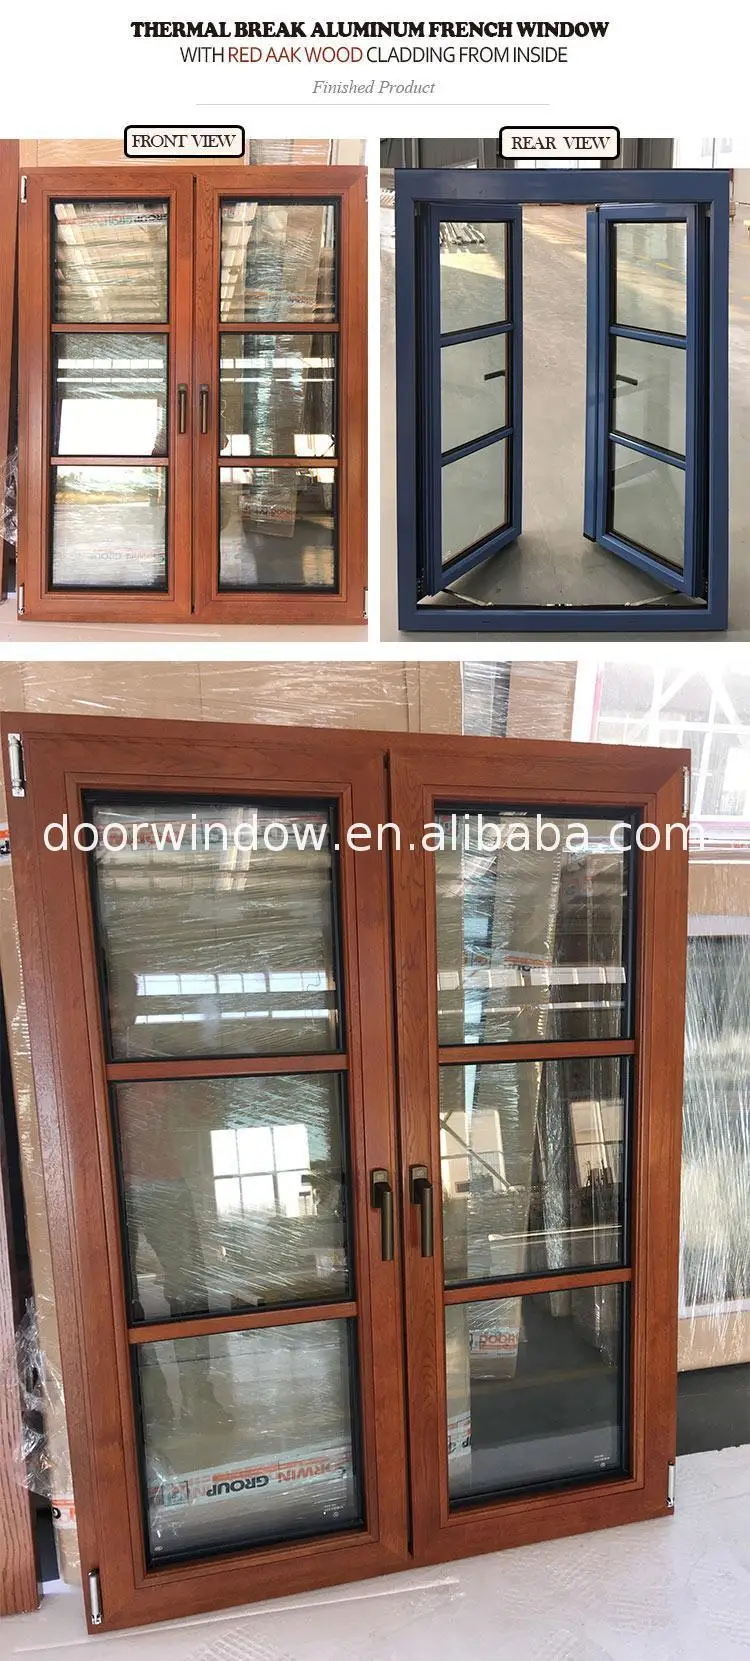 Wholesale price french windows for sale cost window valance